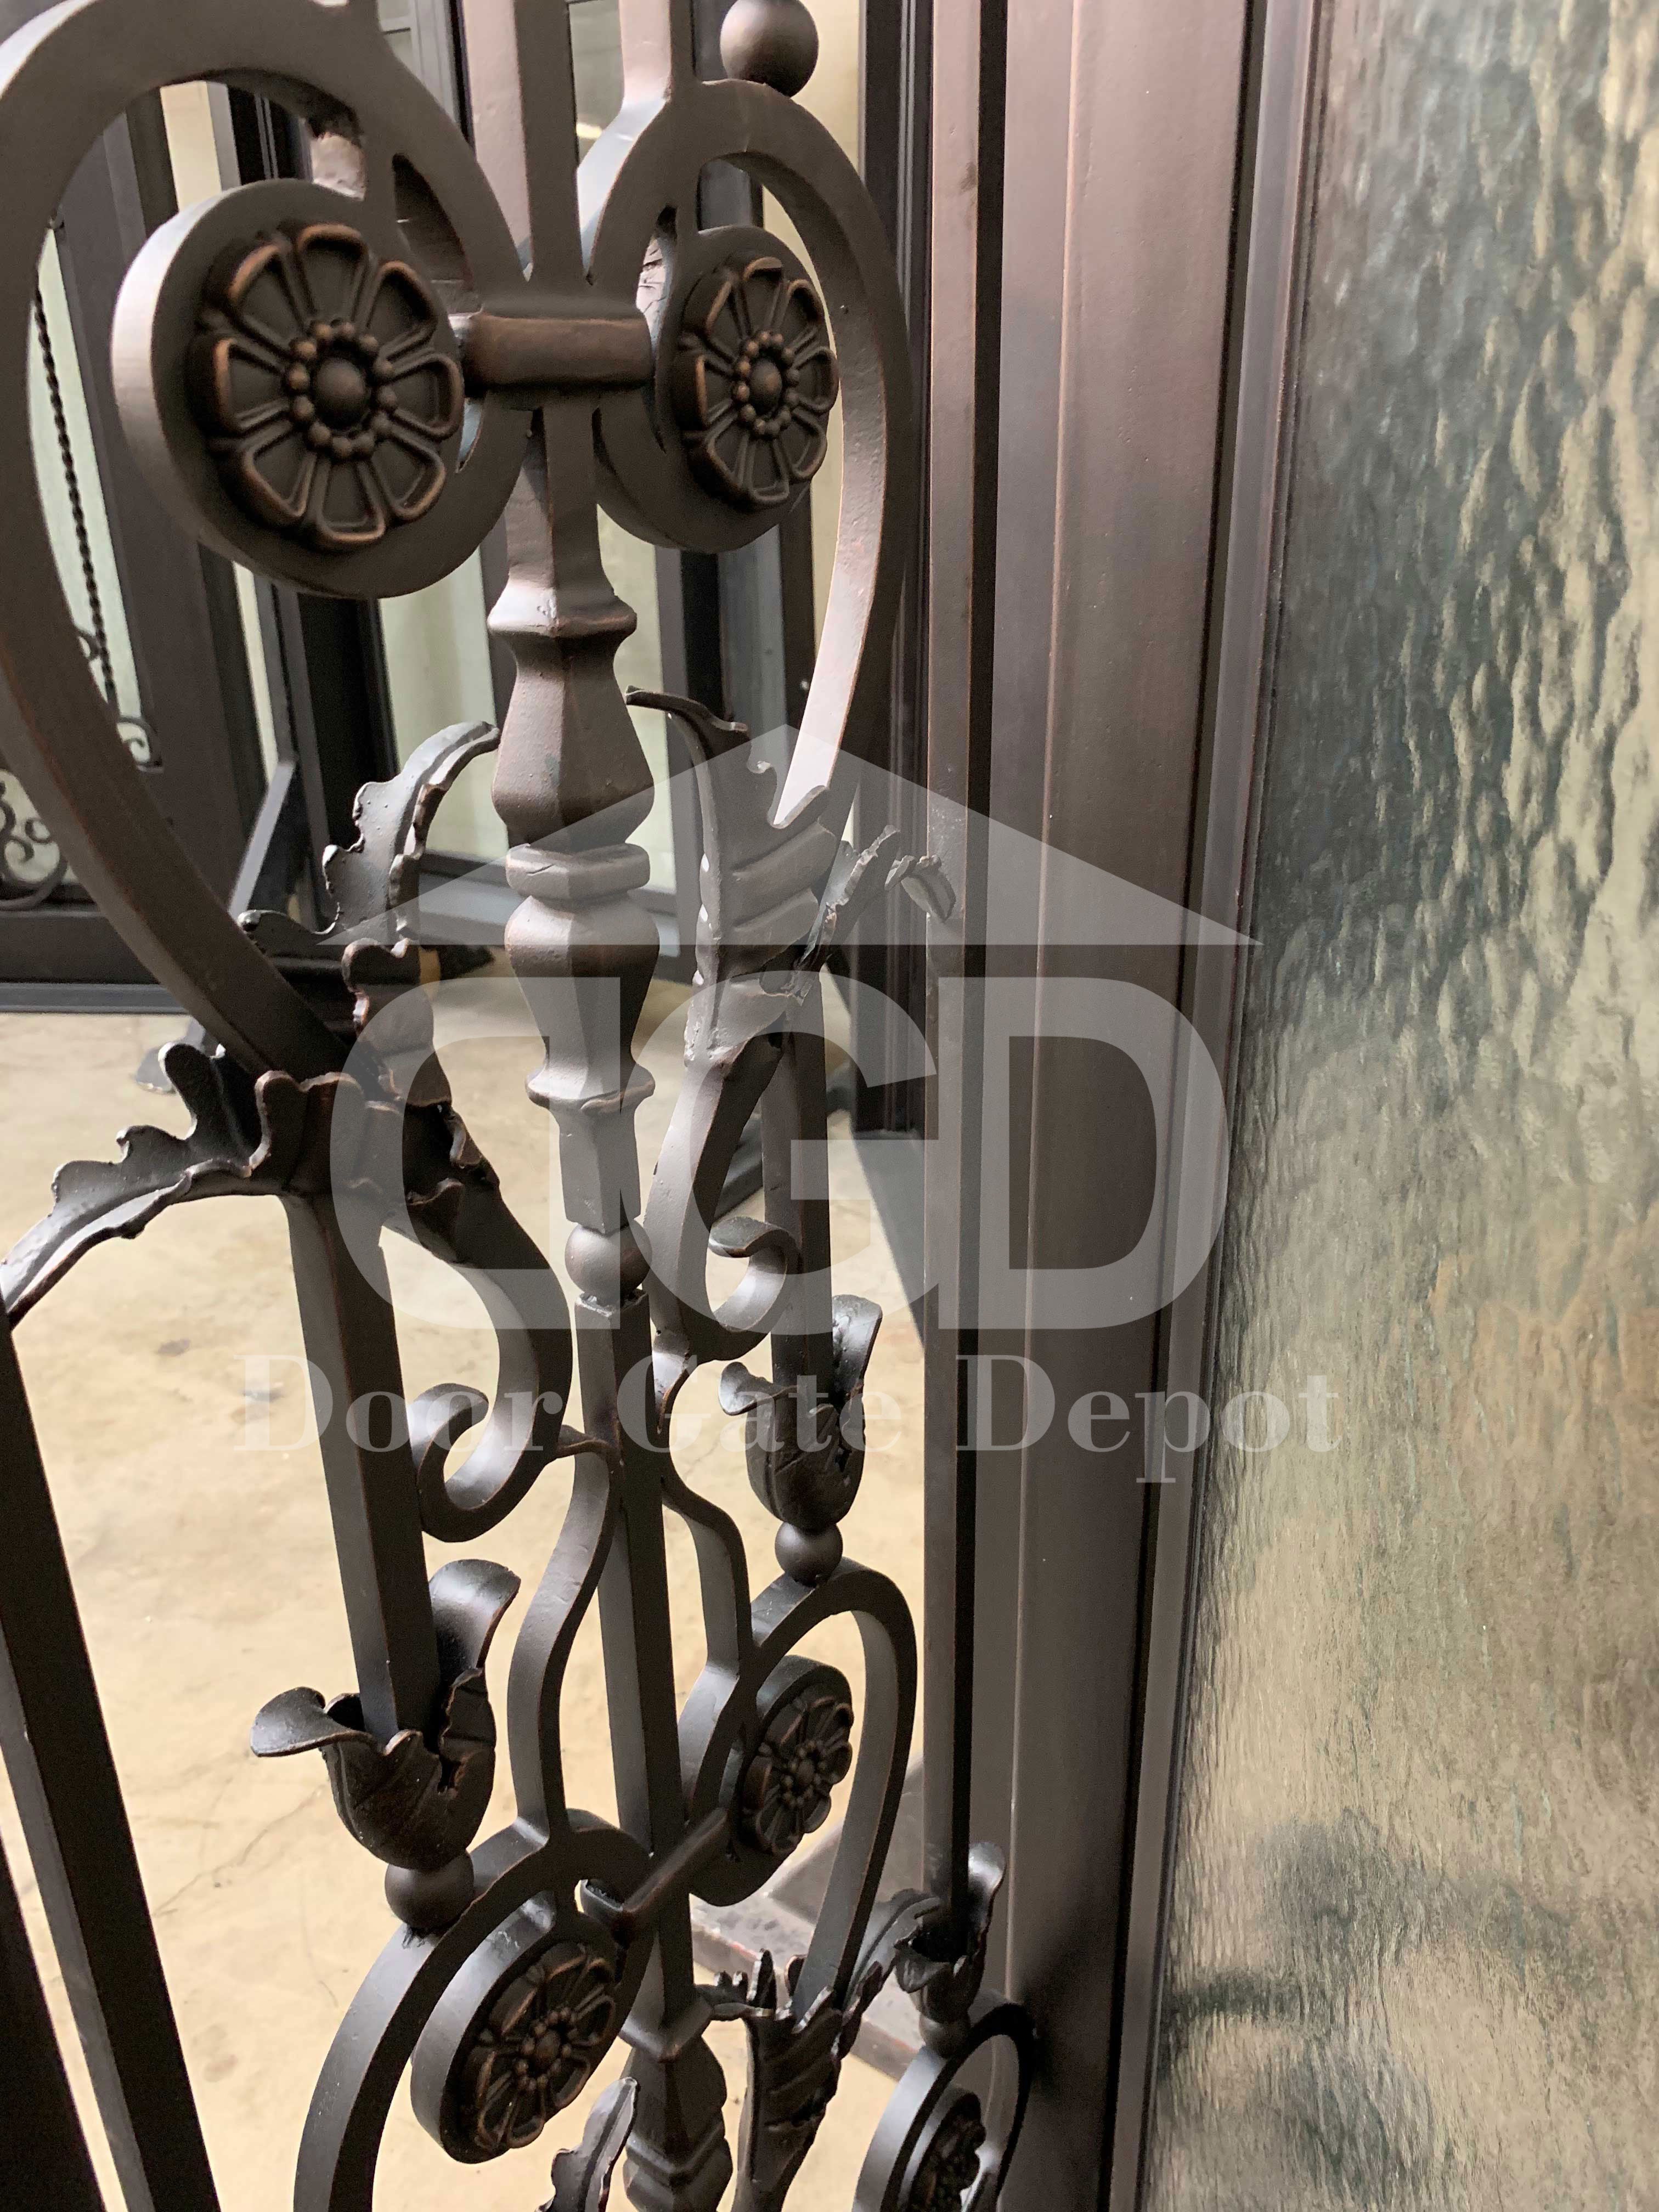 TULIP -square top double front entry, removable bug screen,wrought iron doors -72x96 Right Hand - Door Gate Depot